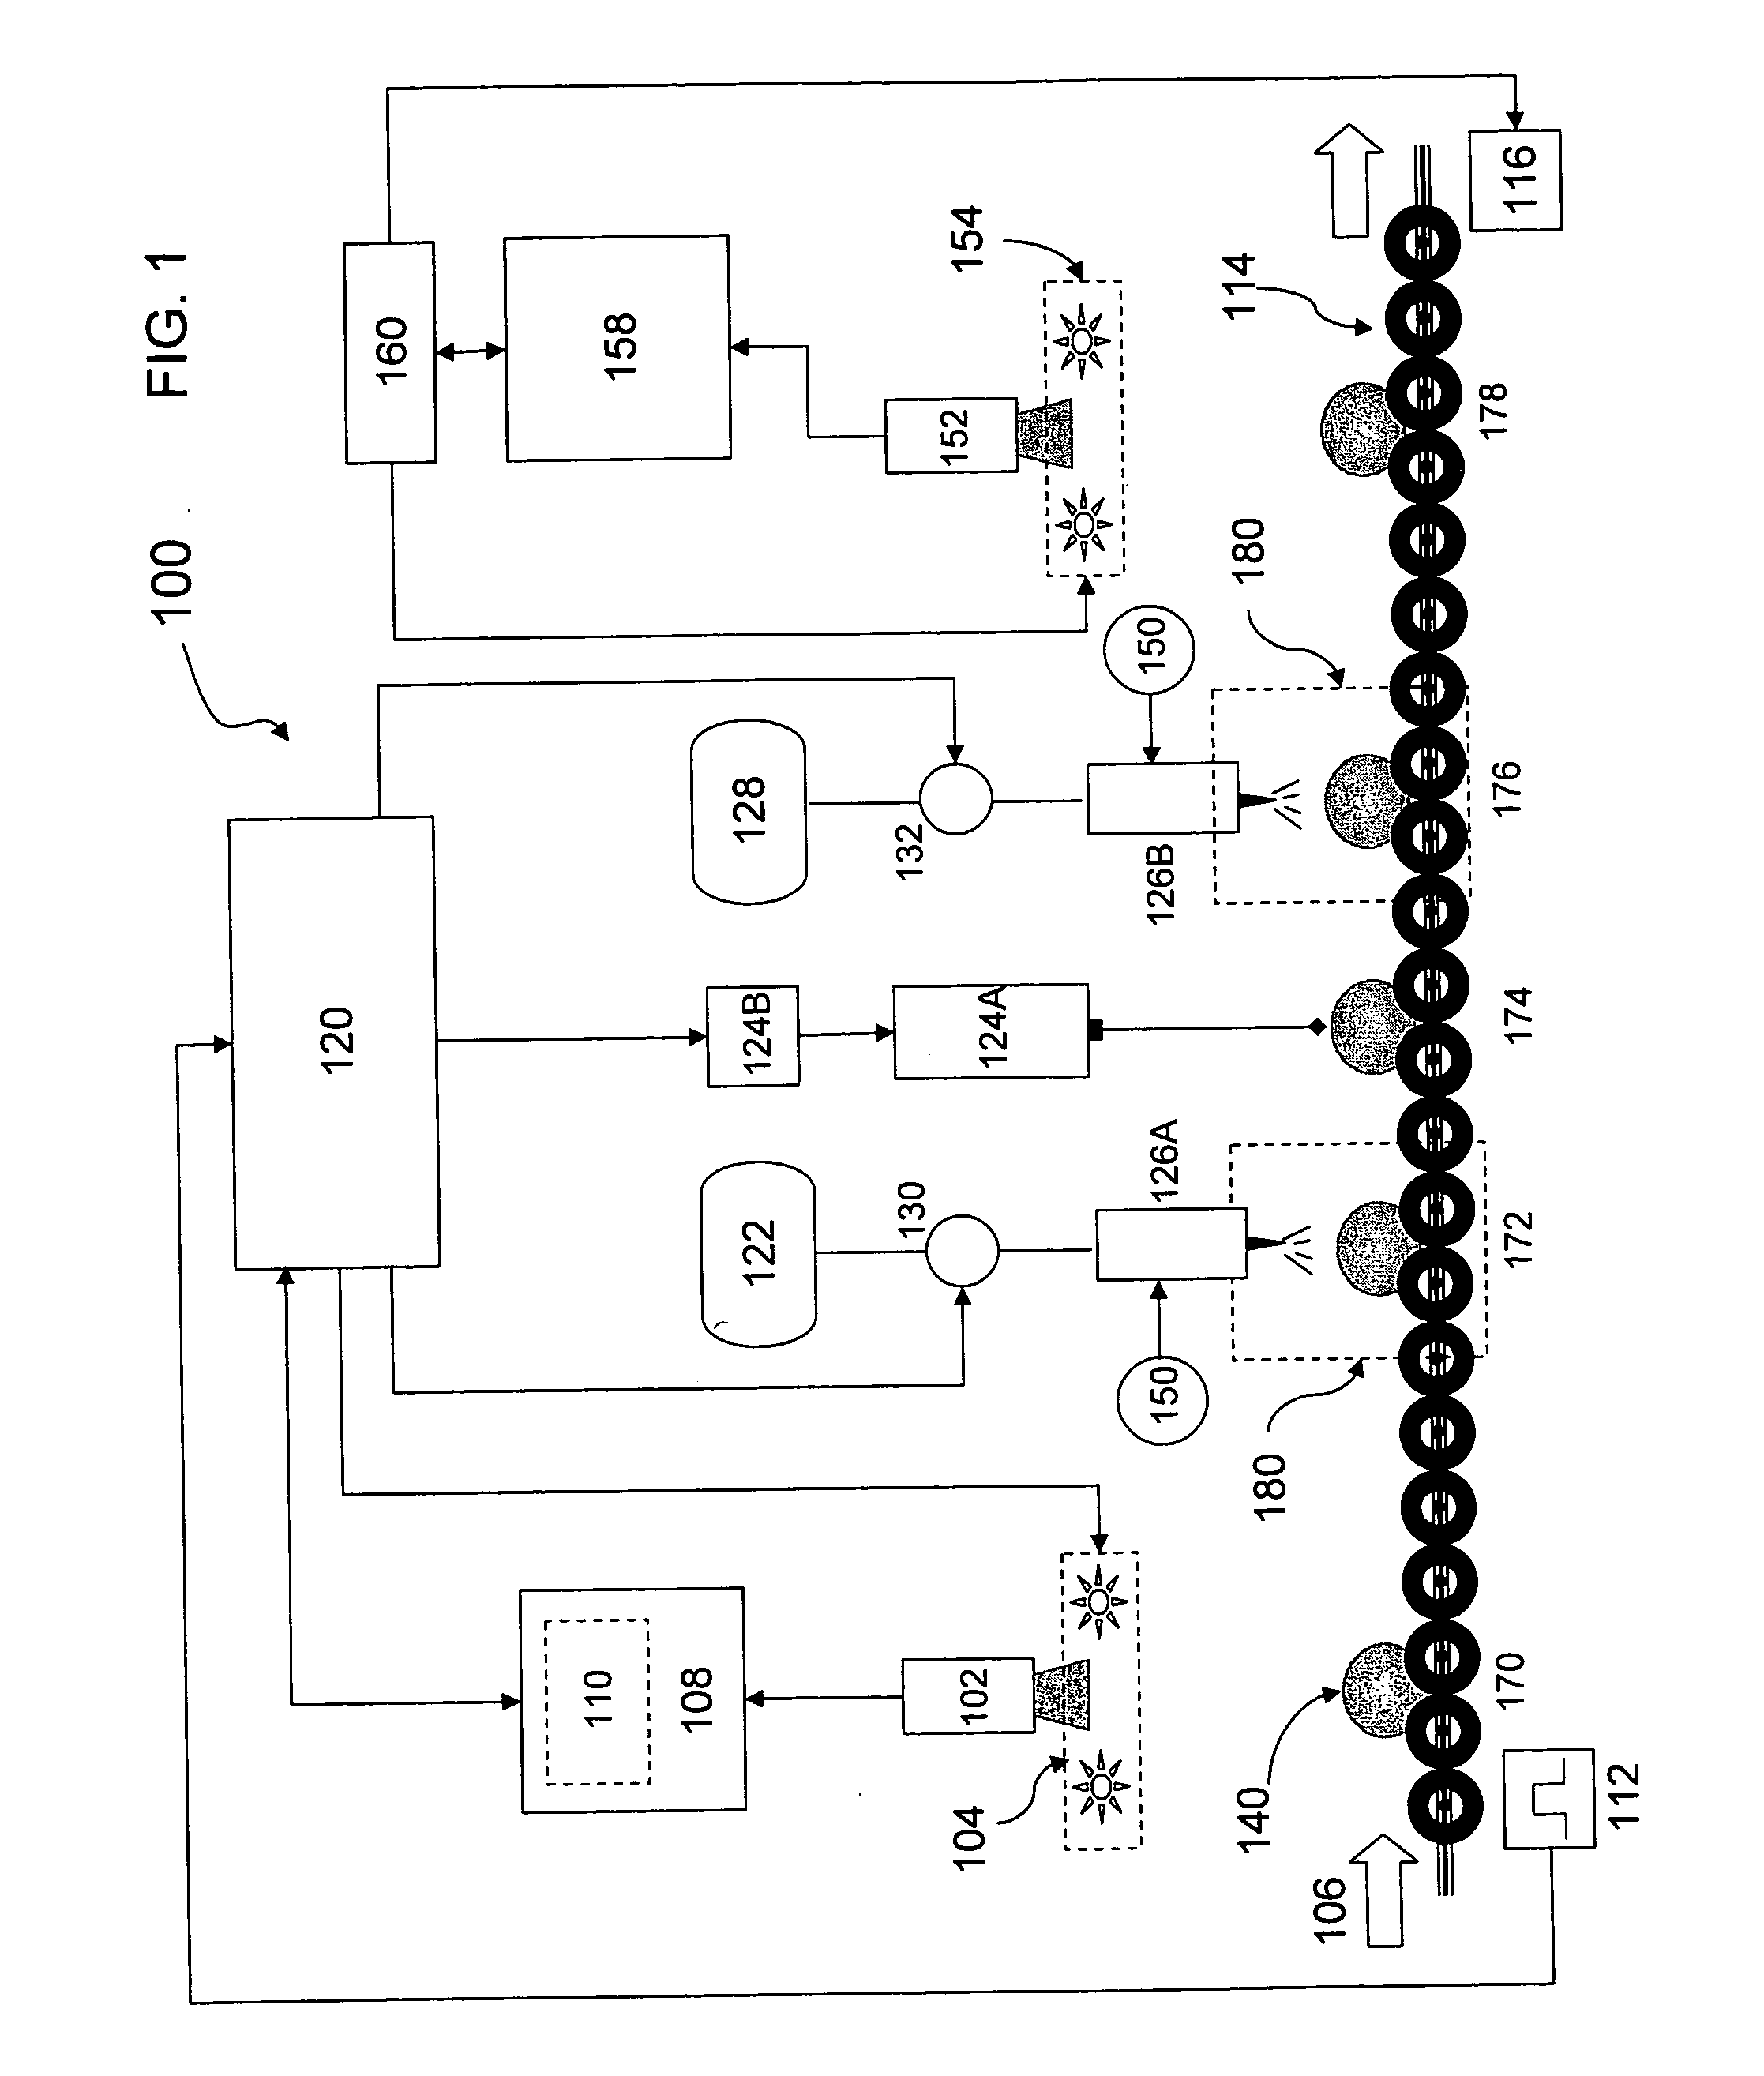 Method and apparatus for non-invasive laser based labeling of plant products